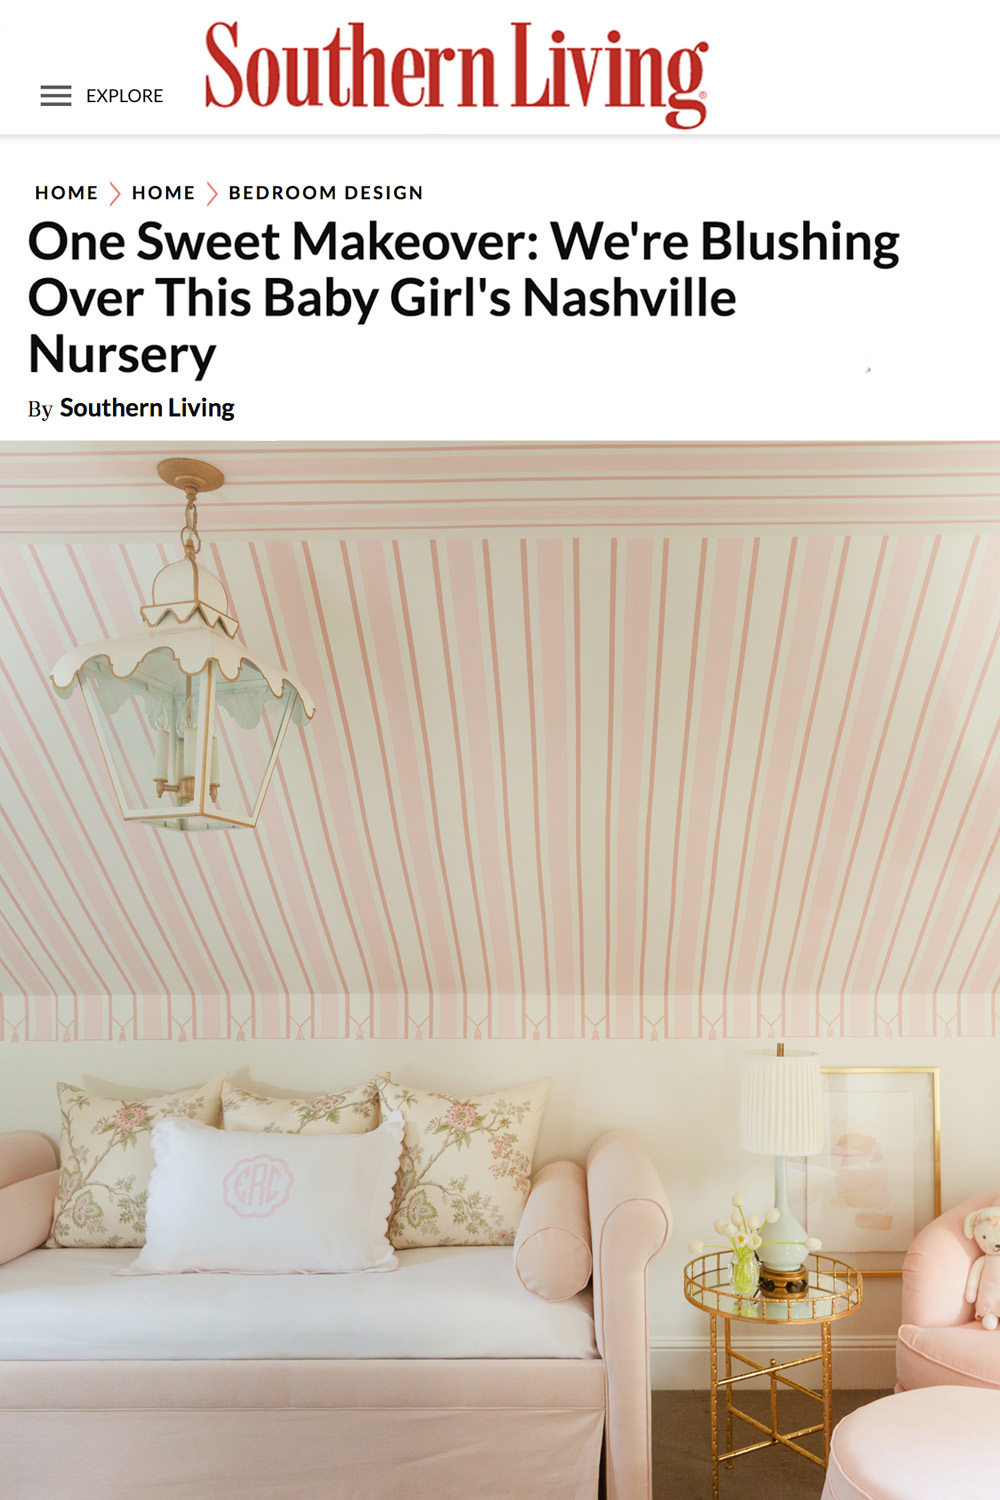 leslee-mitchell-southern-living.jpg